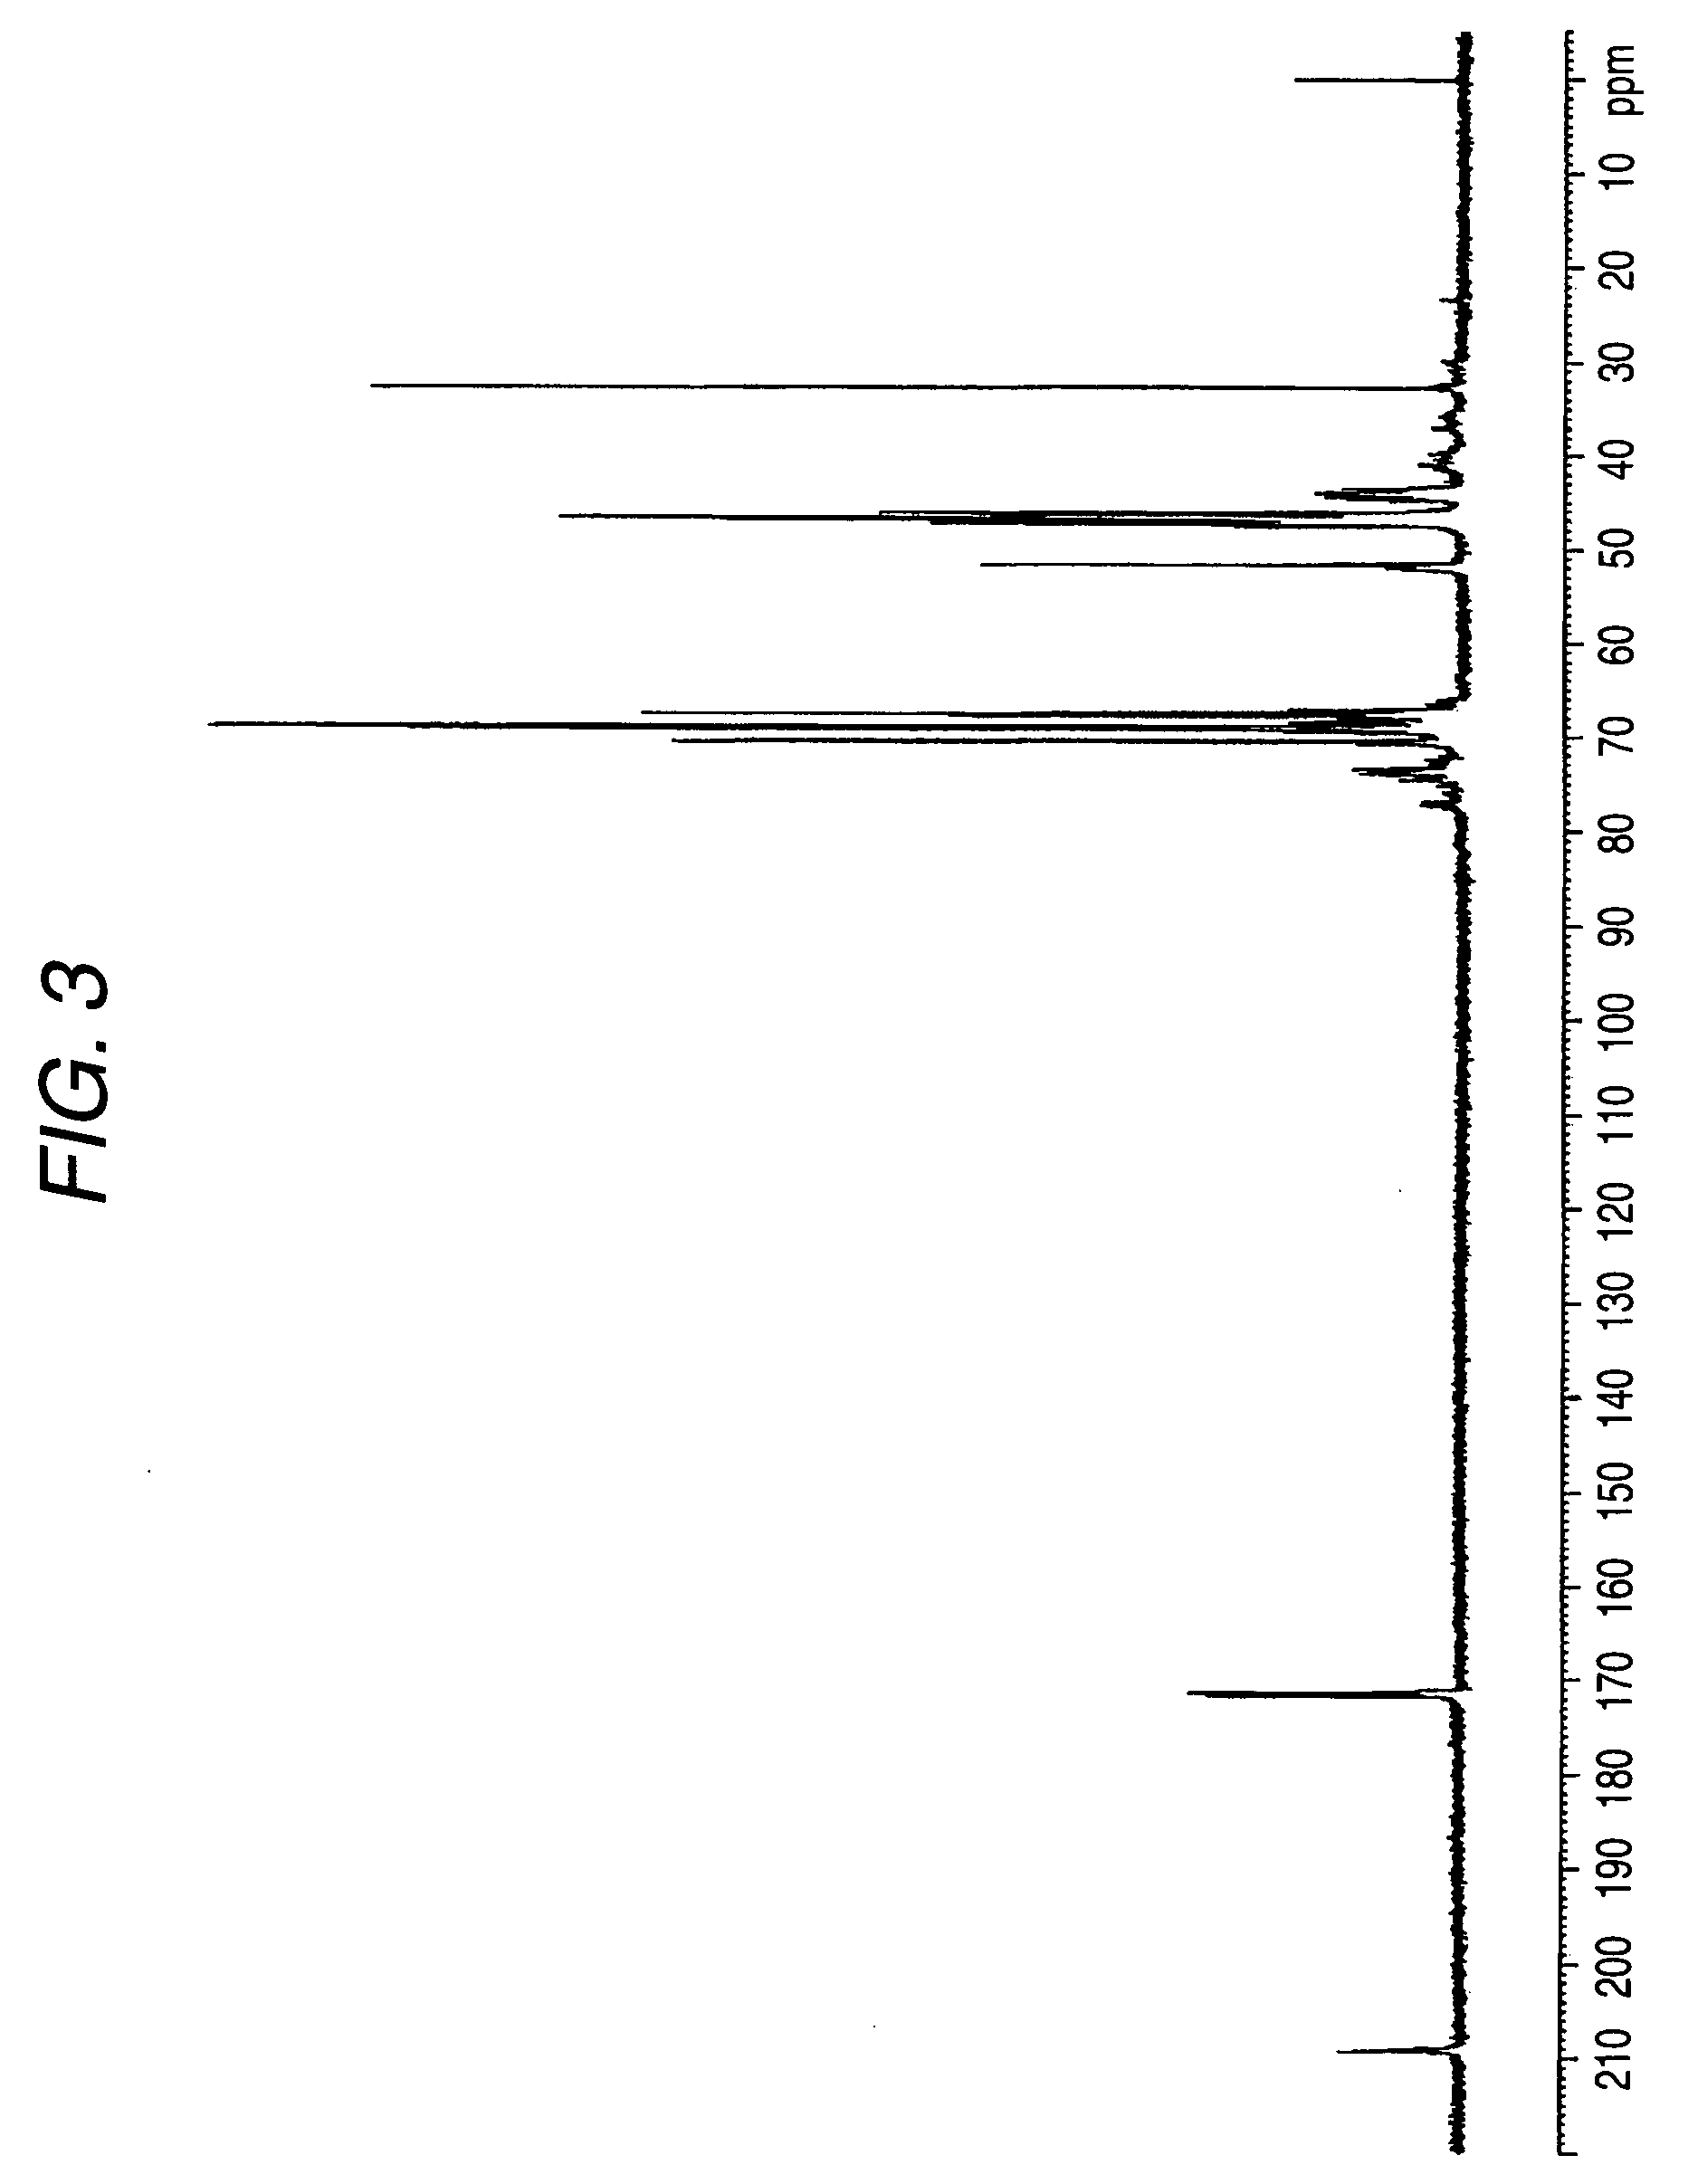 Acetoacetic Ester Group-Containing Polyvinyl Alcohol-Based Resin, Resin Composition, and Uses Thereof